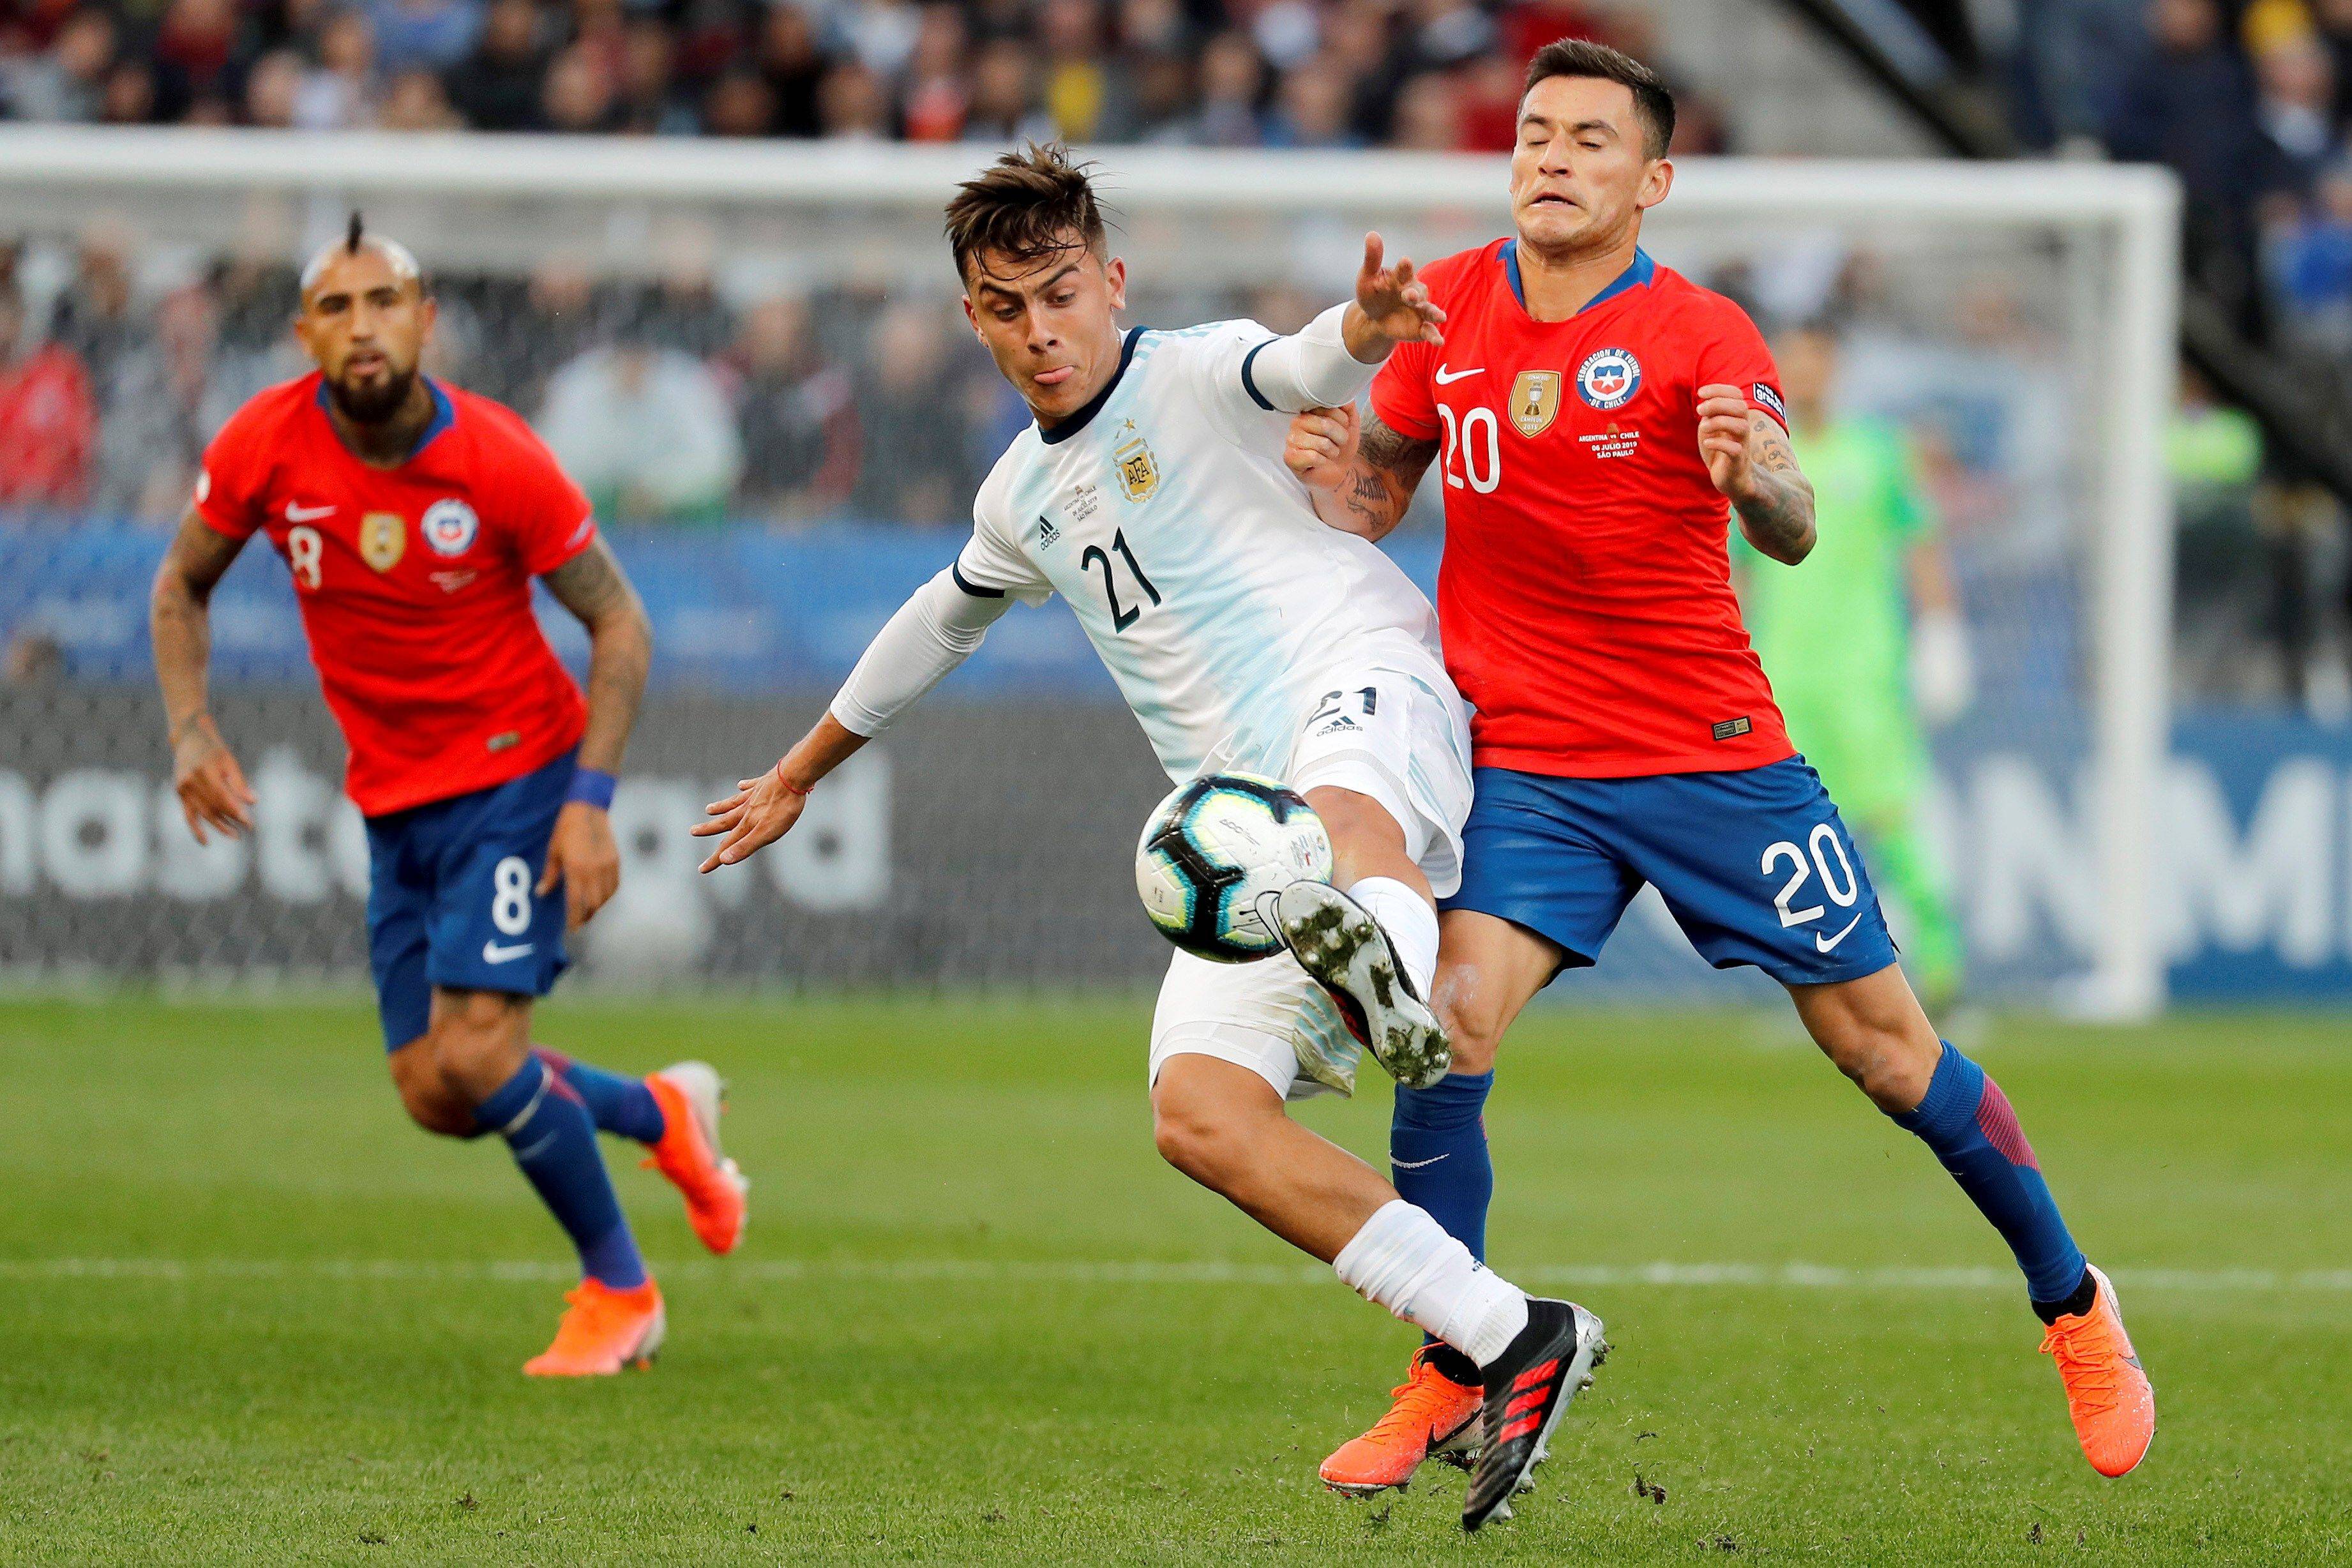 Chile S Aranguiz R Vies For The Ball With Argentina S Paulo Dybala During The Copa America 2019 3r